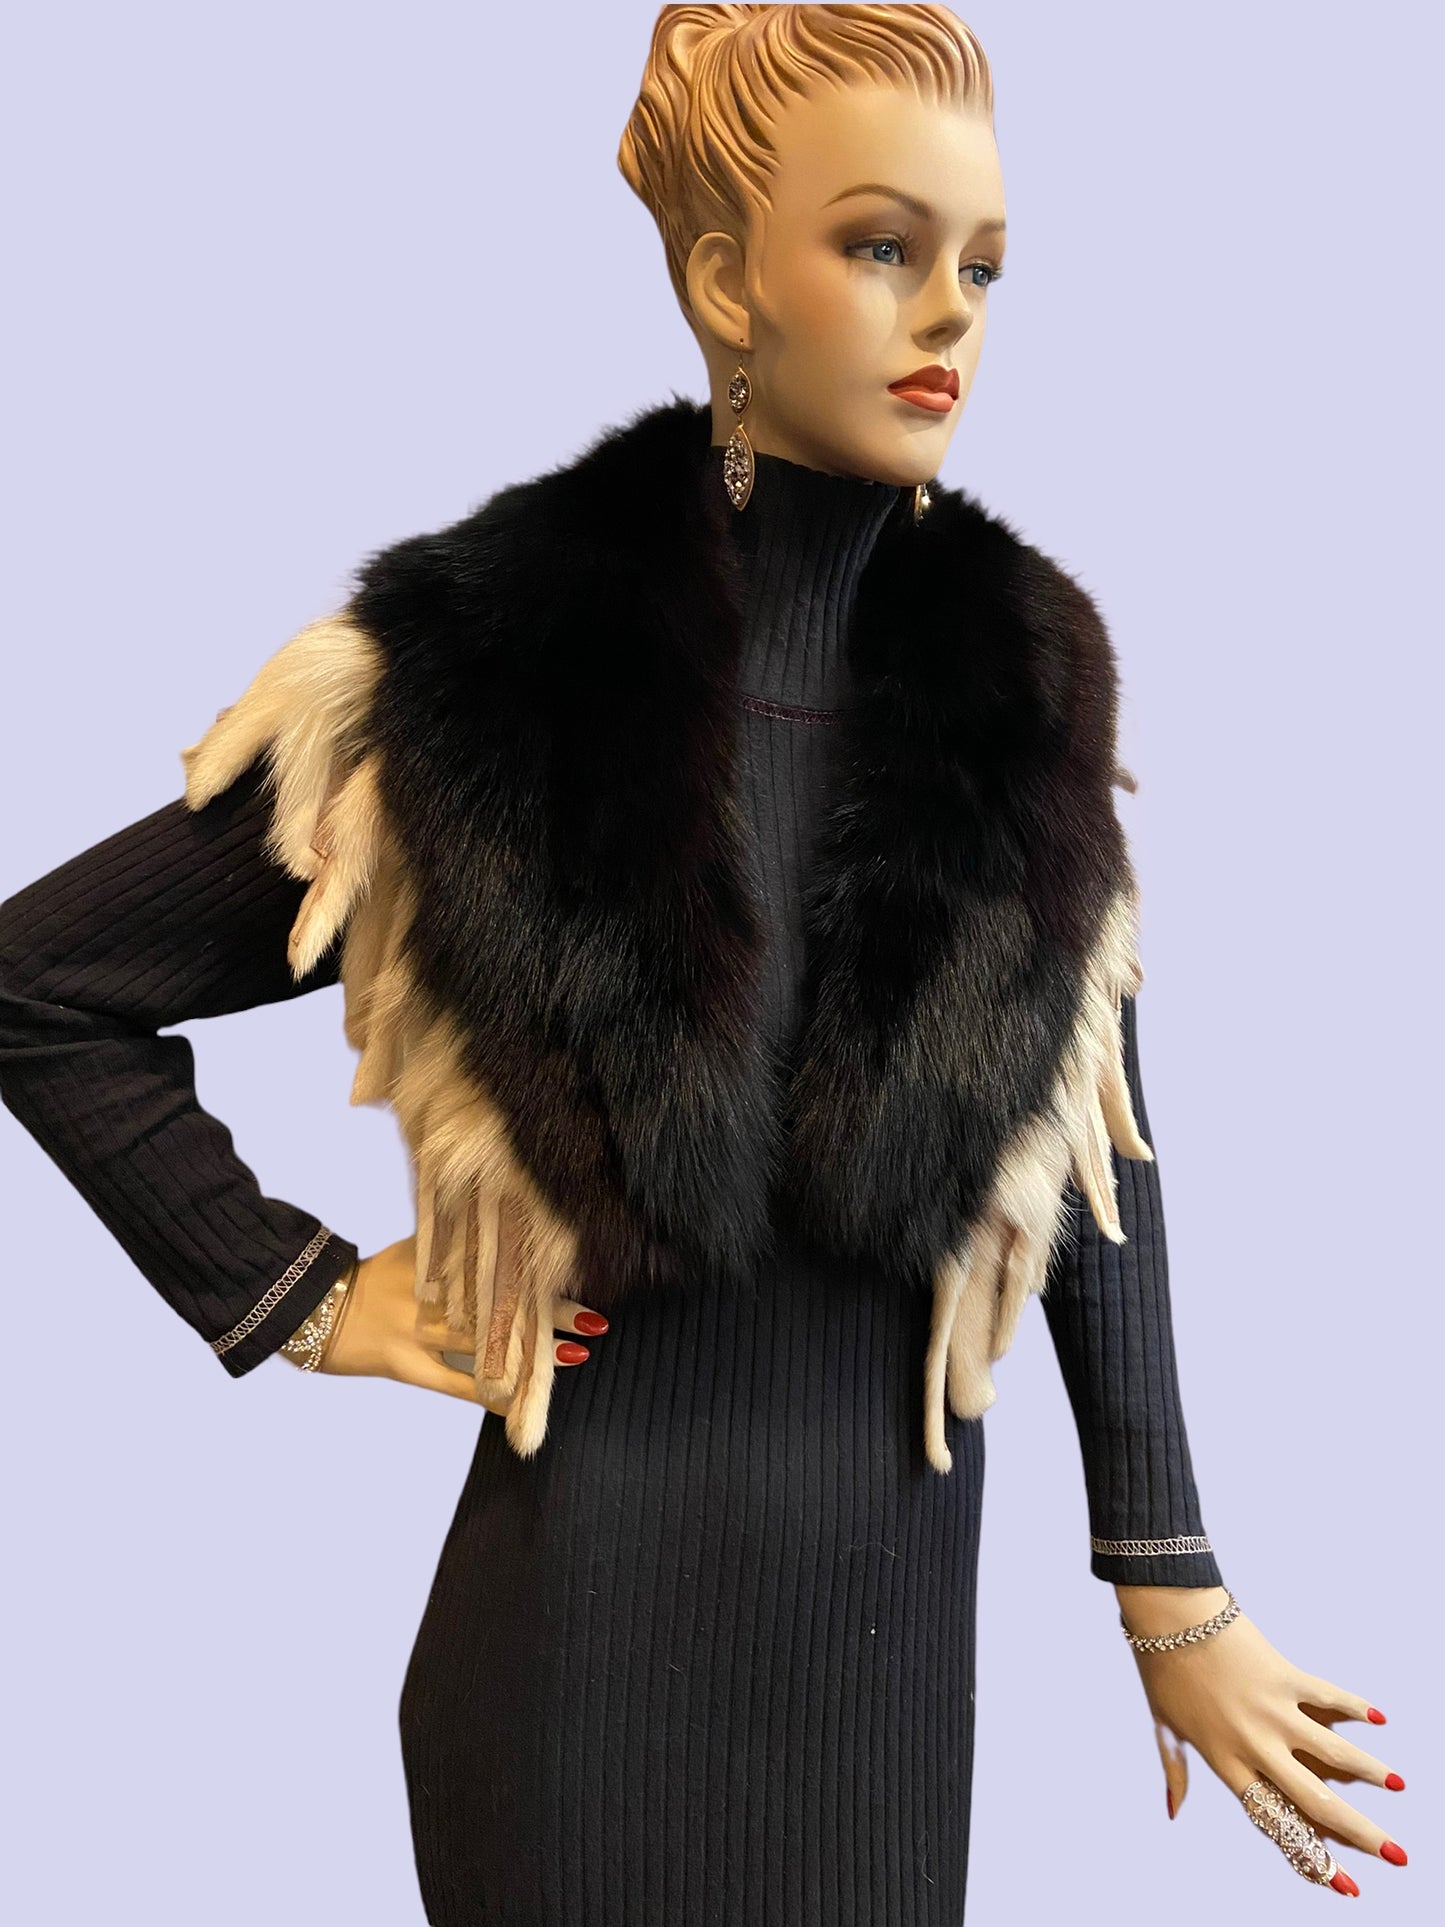 Fox Fur Collar - Black and White With Tassels